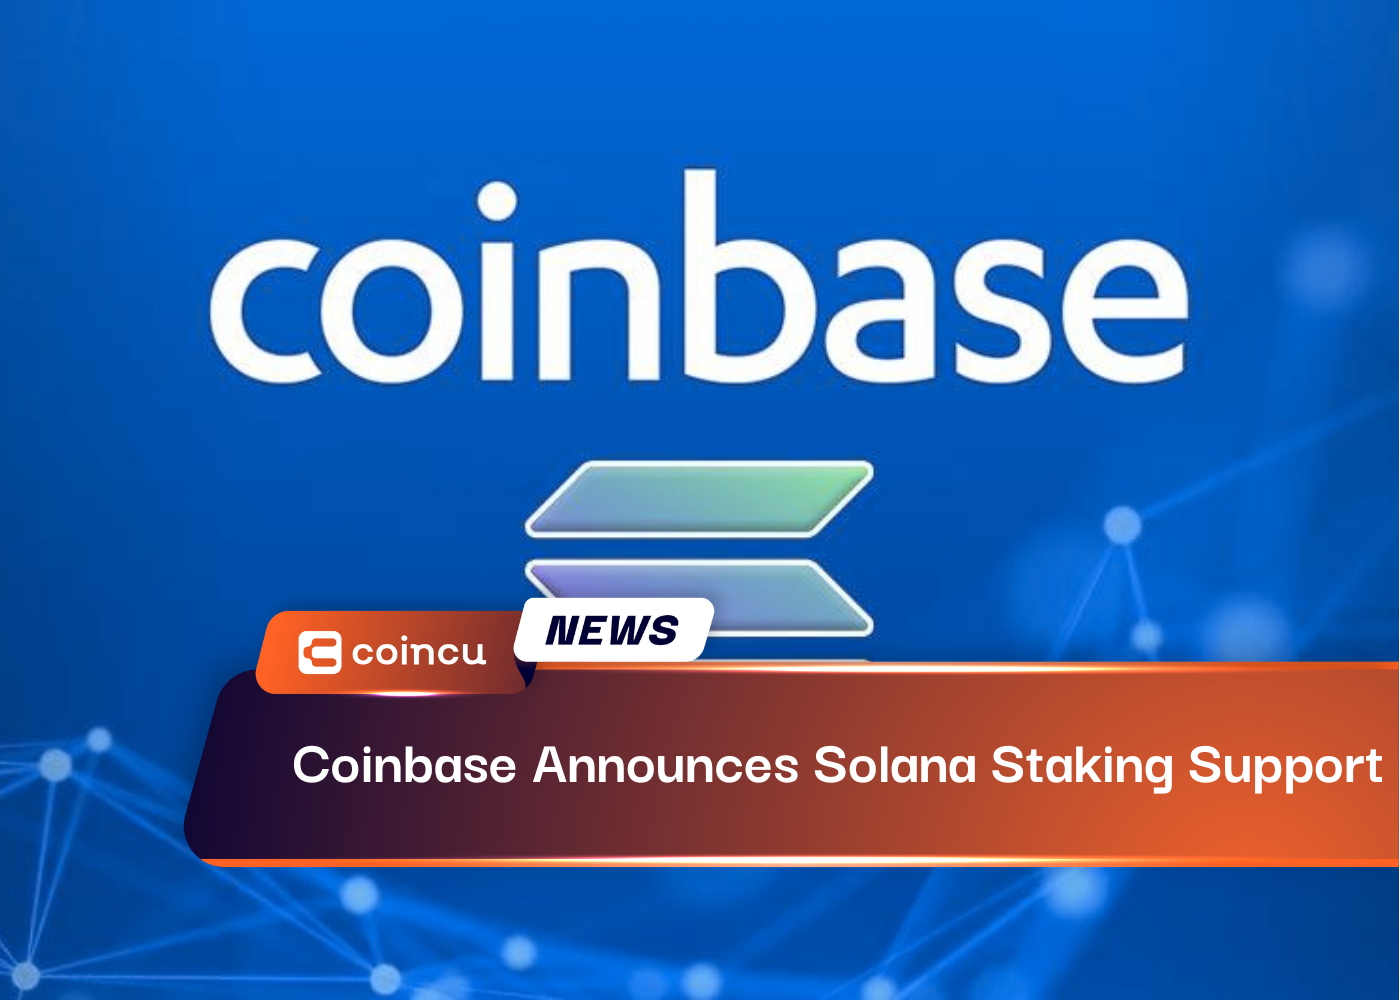 Coinbase Announces Solana Staking Support